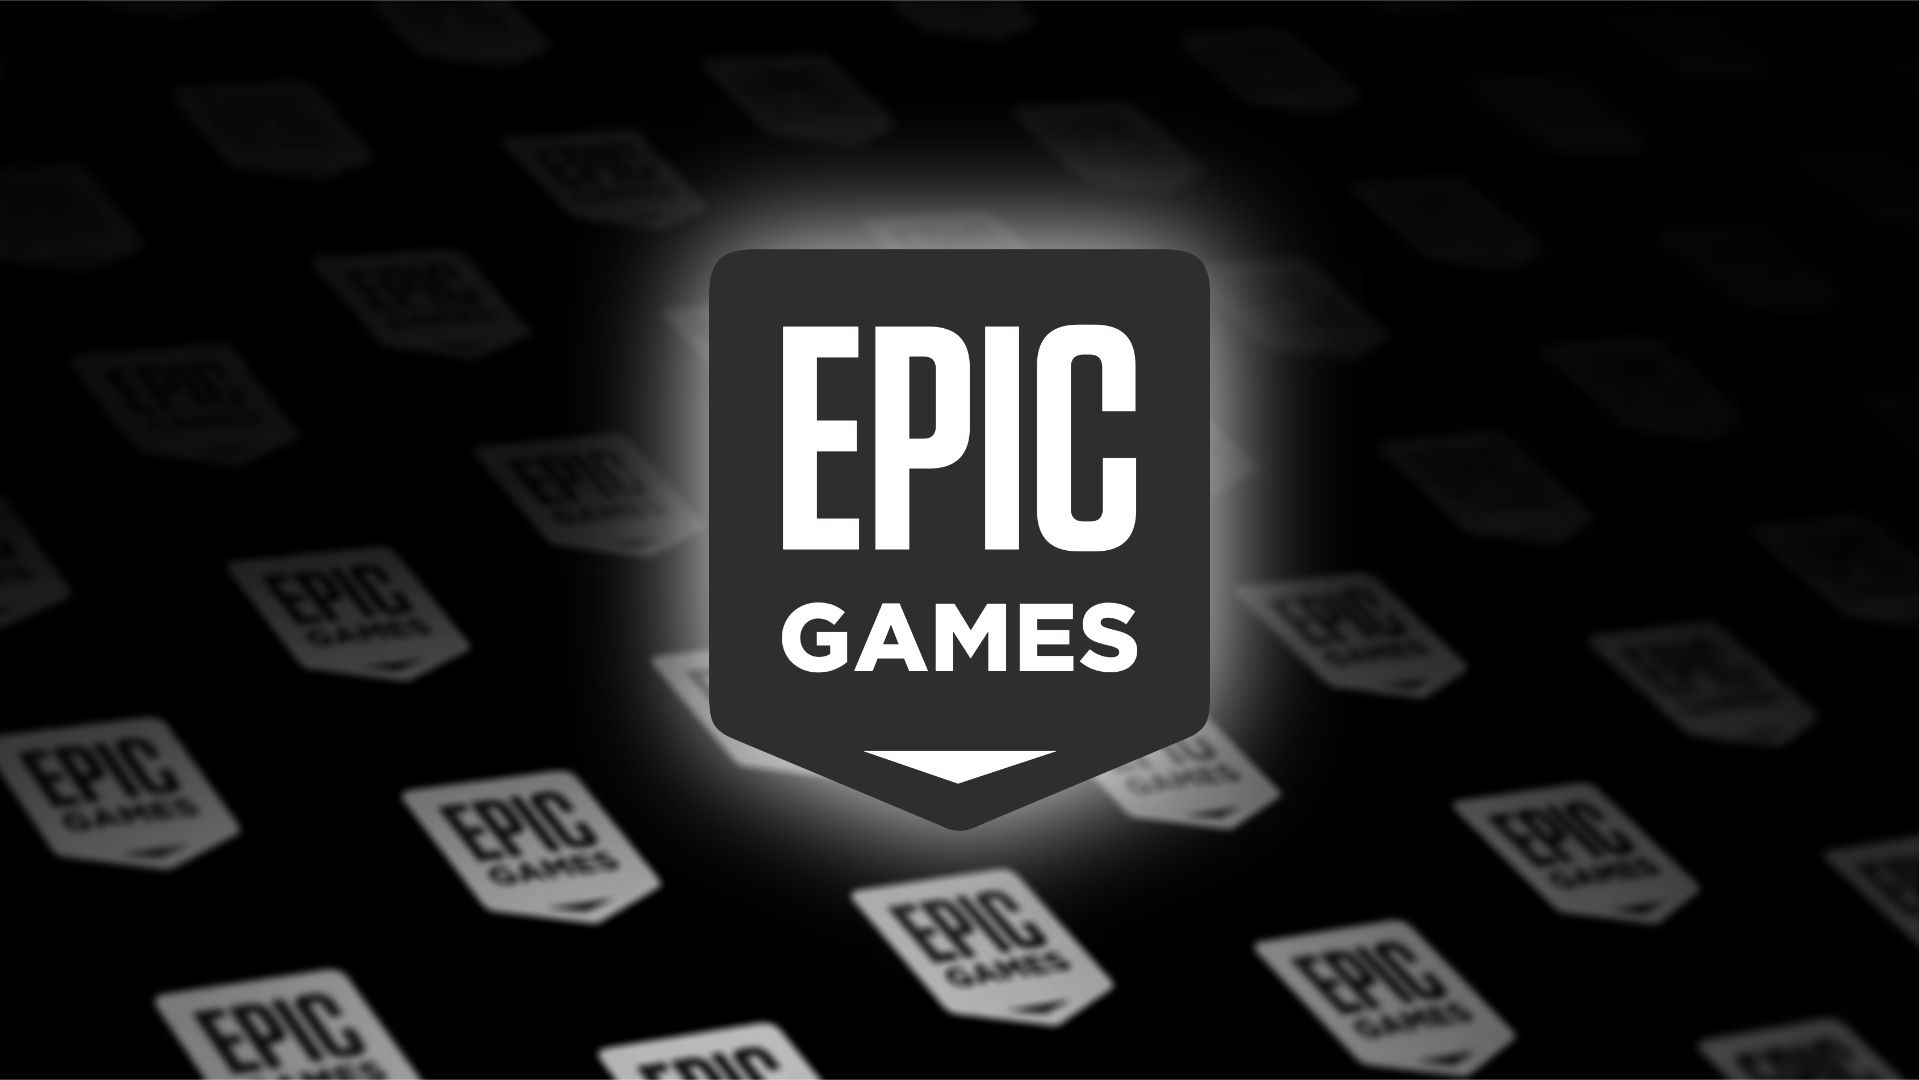 Fortnite Maker Epic Games Cuts 830 Staff as CEO Calls Layoffs 'Only Way' -  Decrypt